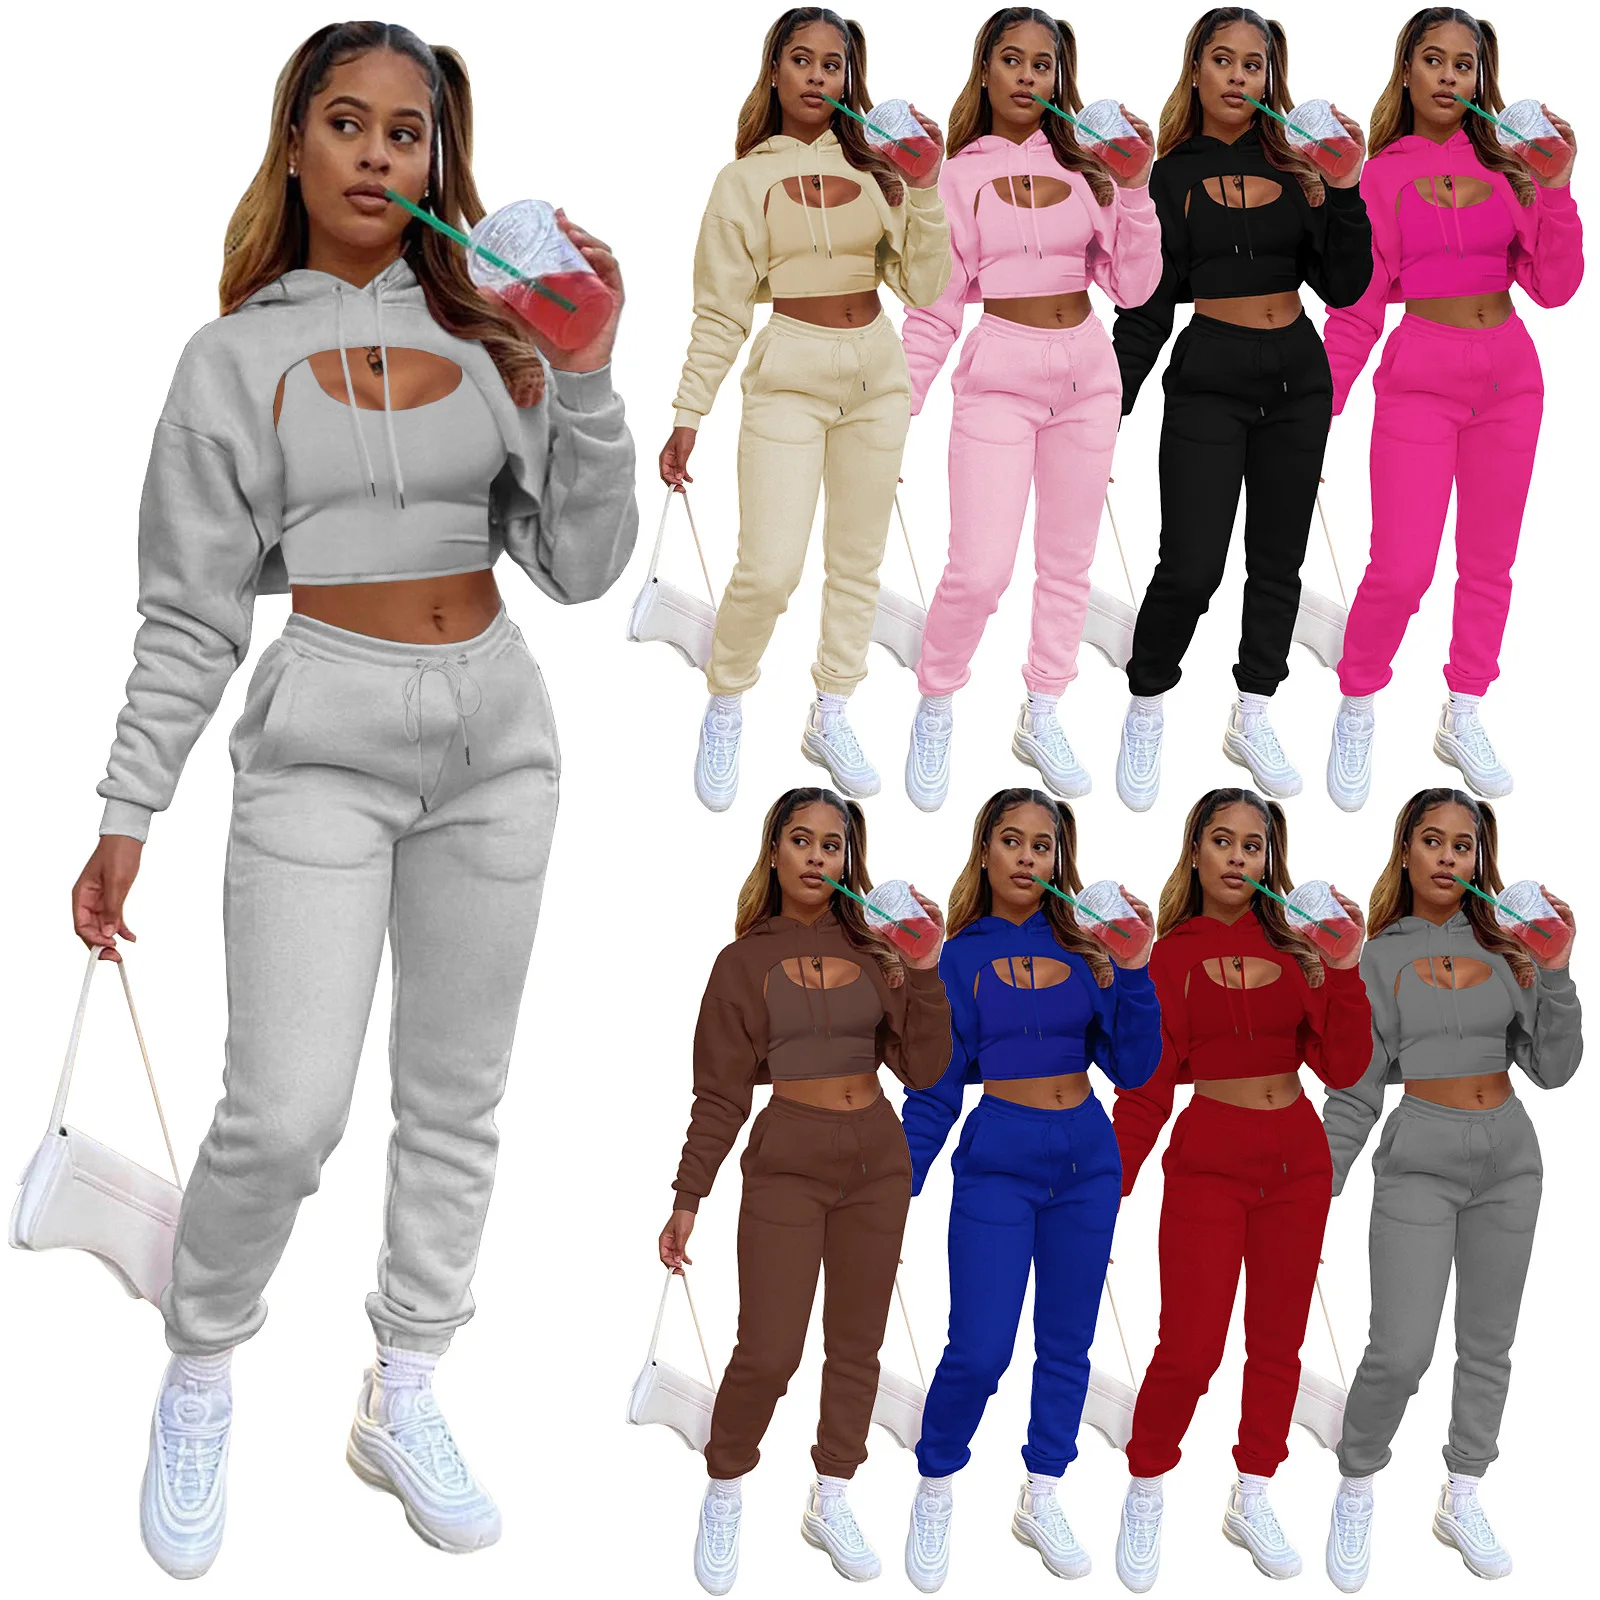 

Winter Casual Letter Print Outfits Sport Three Piece Sweat Suits Set Sweatshirt And Joggers 3 Piece Pants Set Women -PT, Pink,black,rose red,gray,apricot